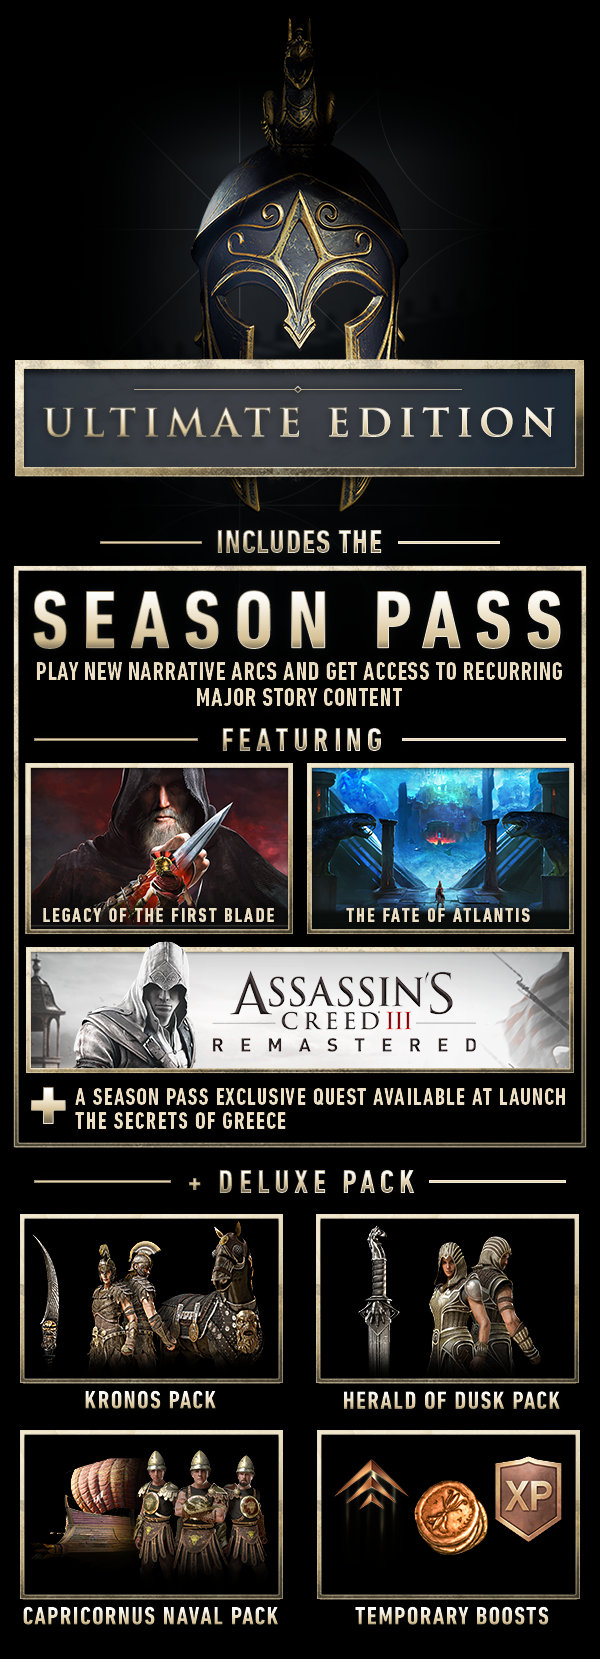 Assassin's Creed Odyssey - Ultimate Edition includes